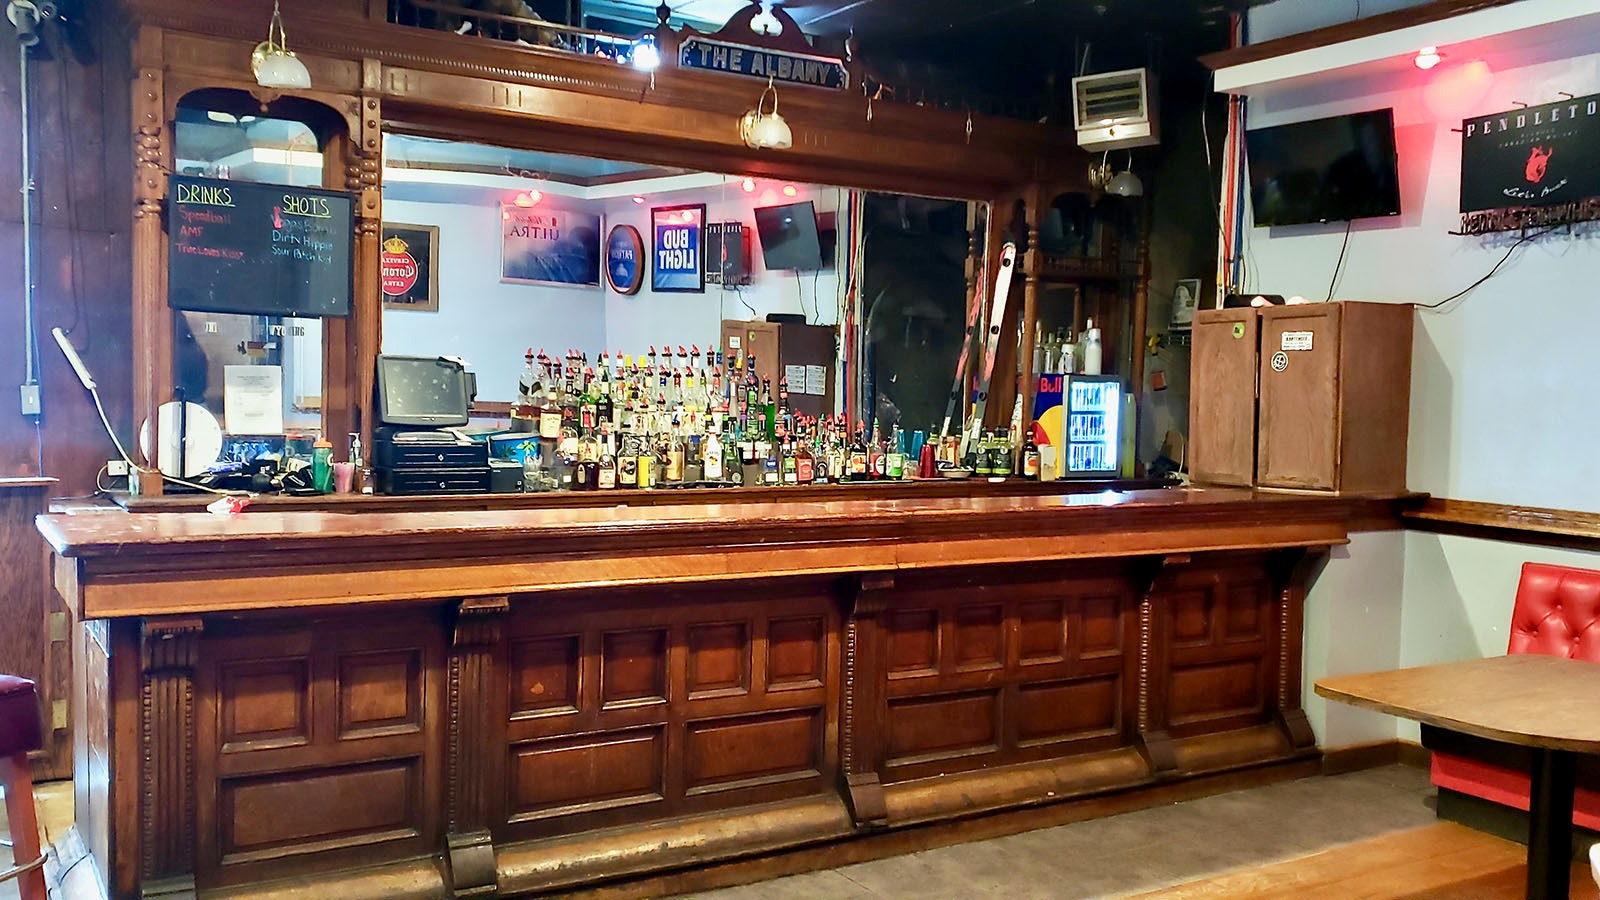 Another historic bar in the Buckhorn upstairs in the Parlor.